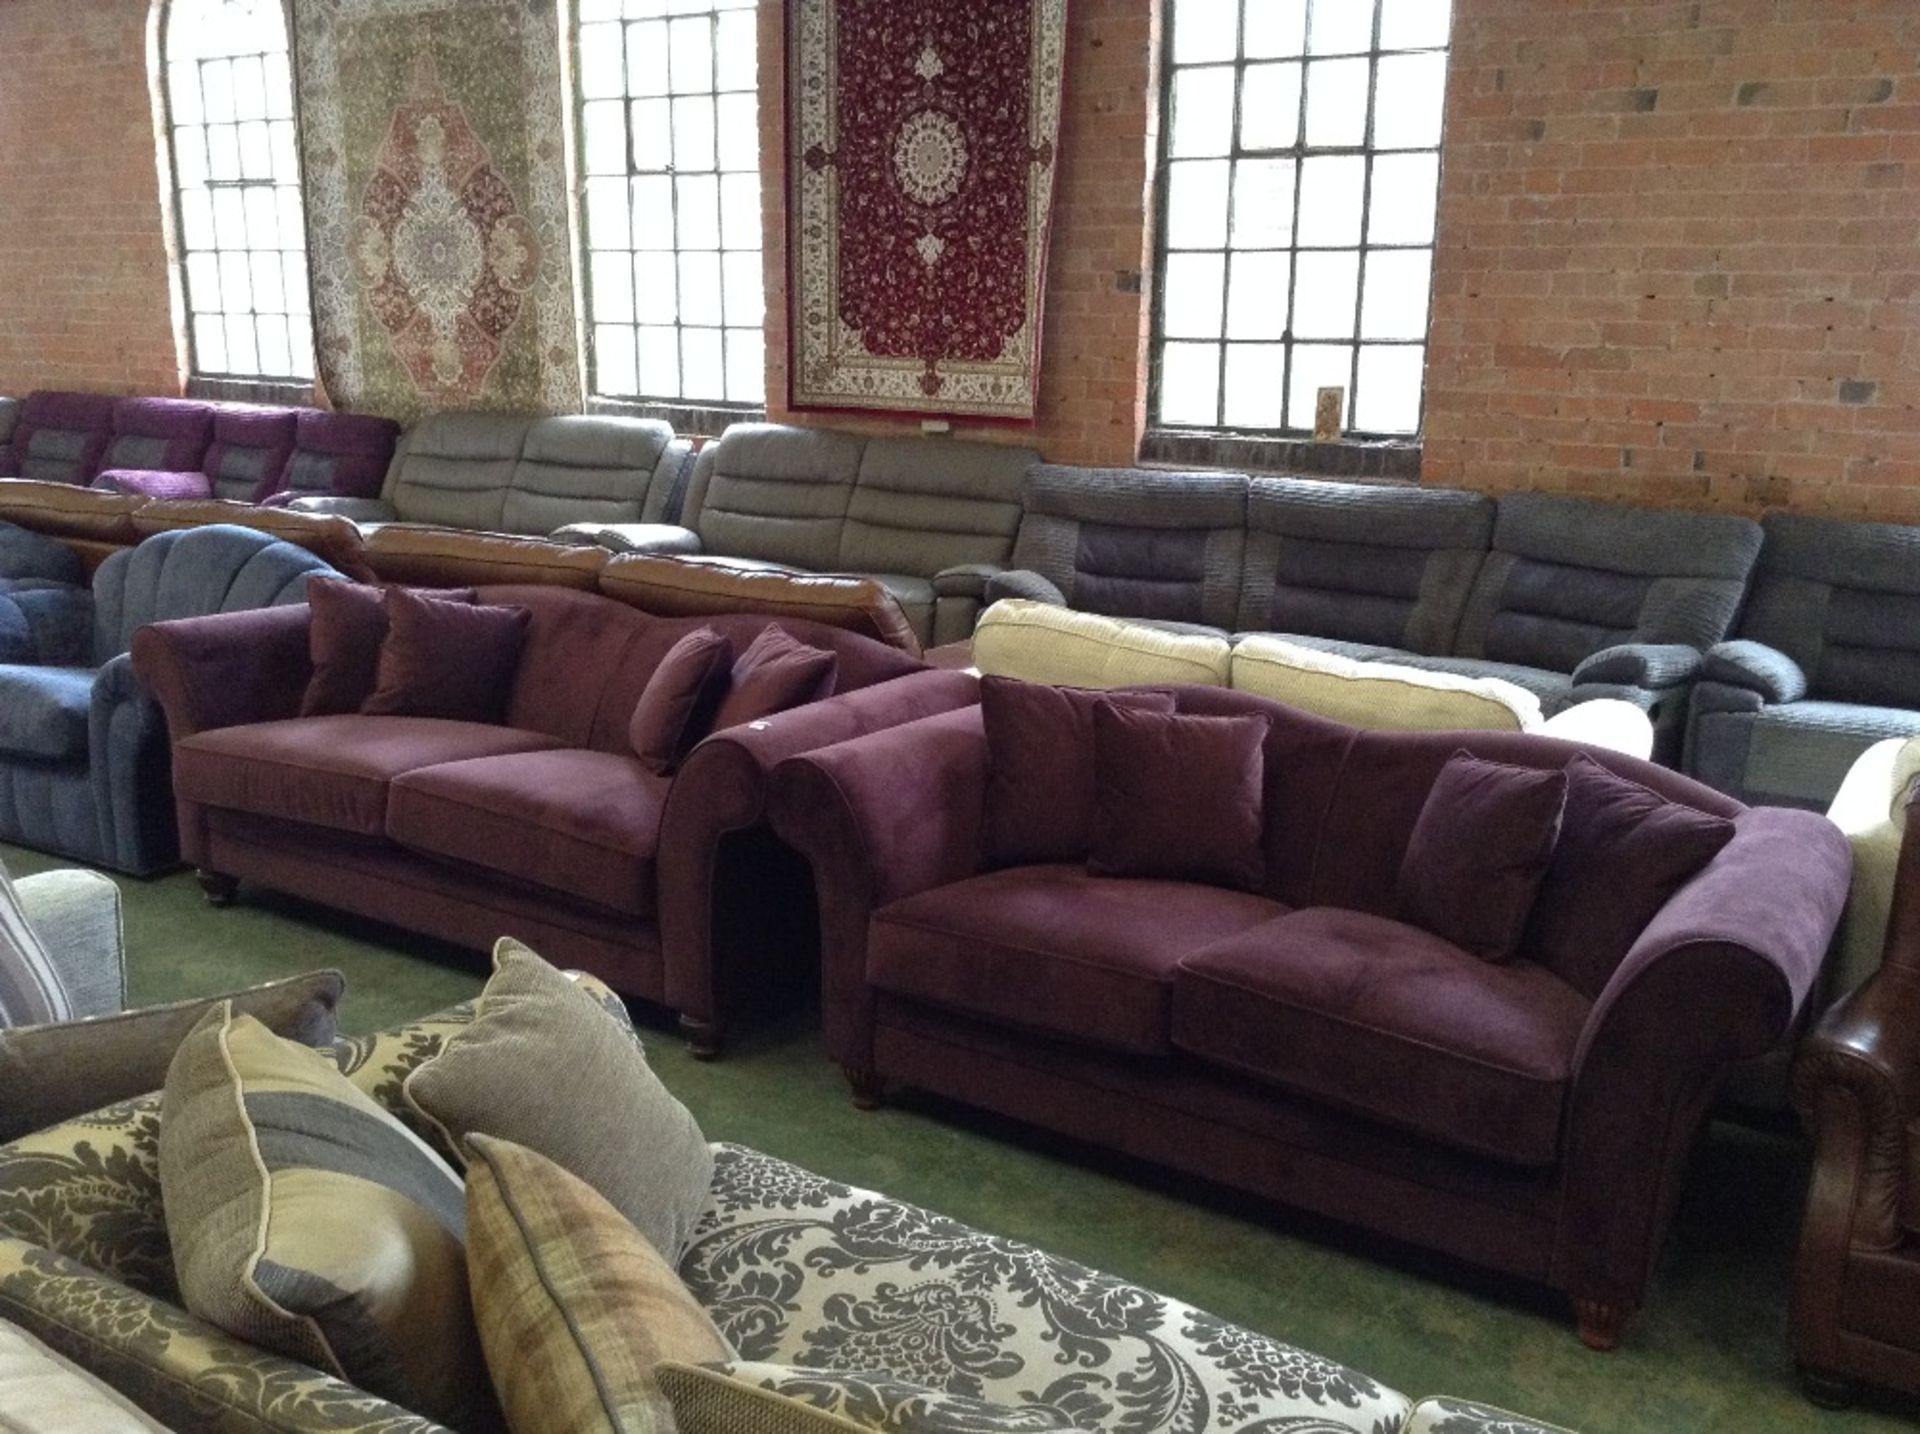 WINSLOW LUXOR GRAPE 3 SEATER SOFA AND 2 SEATER SOF